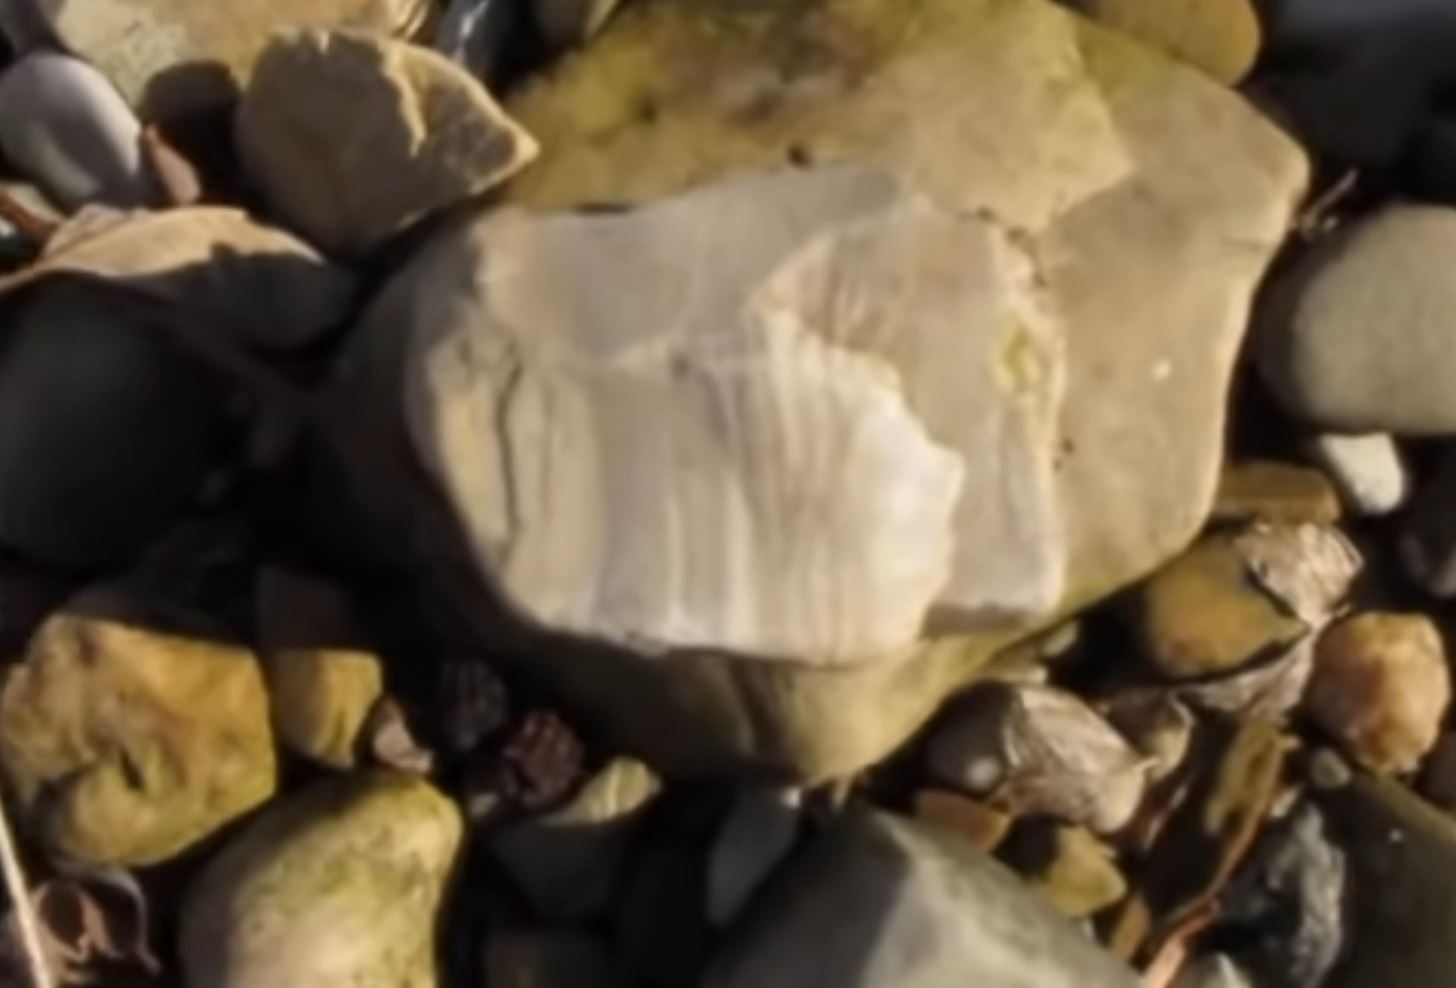 How to Identify Flint and Other Types of Sparking Rocks to Light a Fire